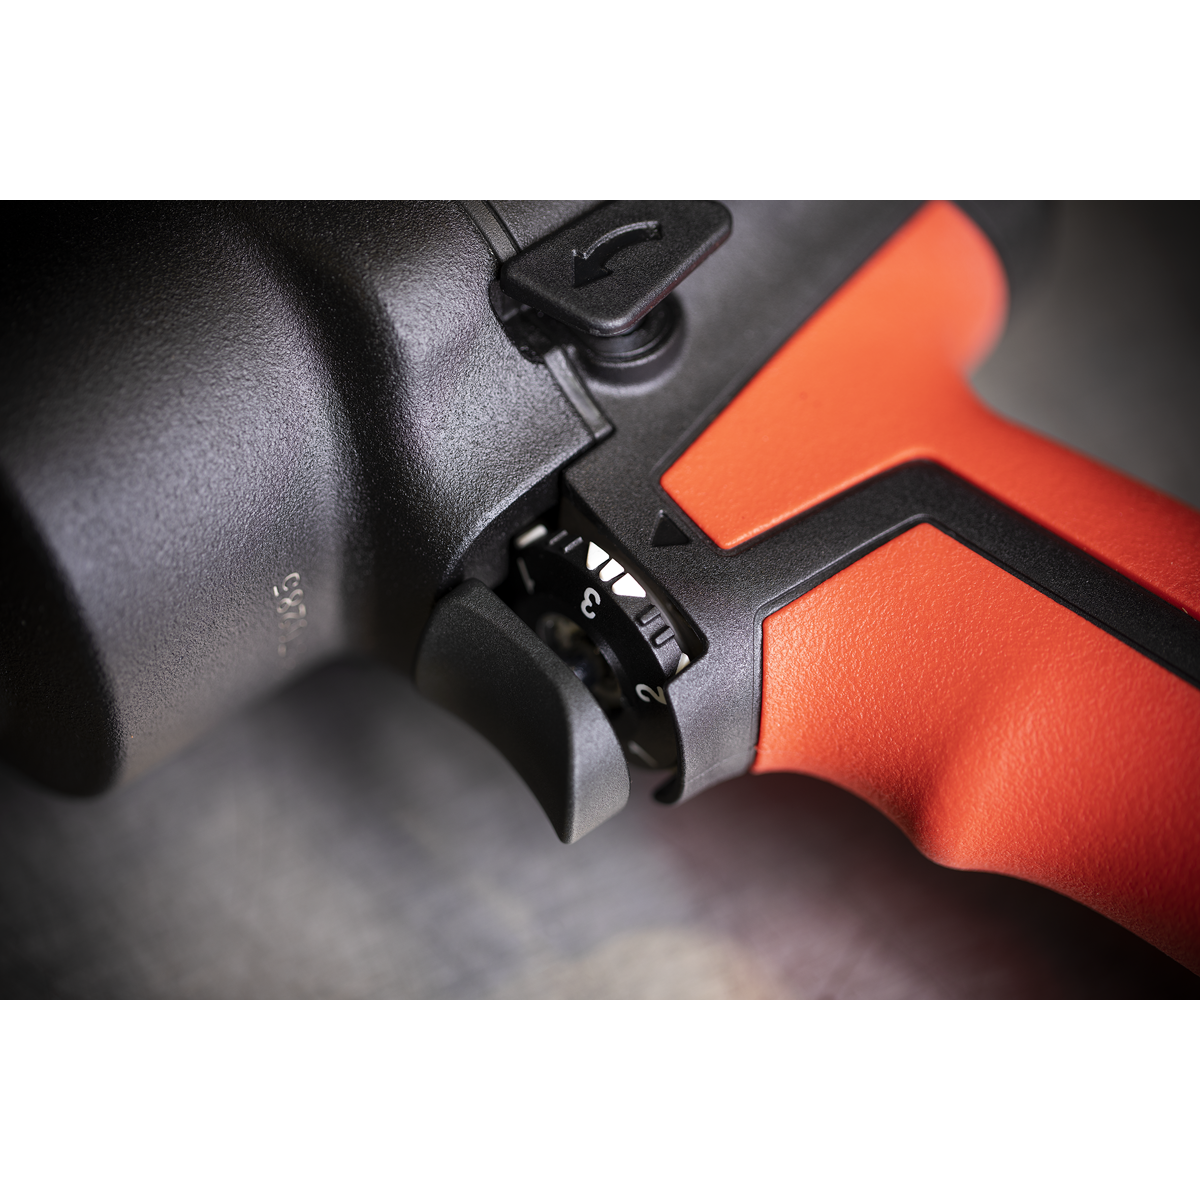 Sealey low noise level and soft grips to help reduce vibration and chill impact wrench